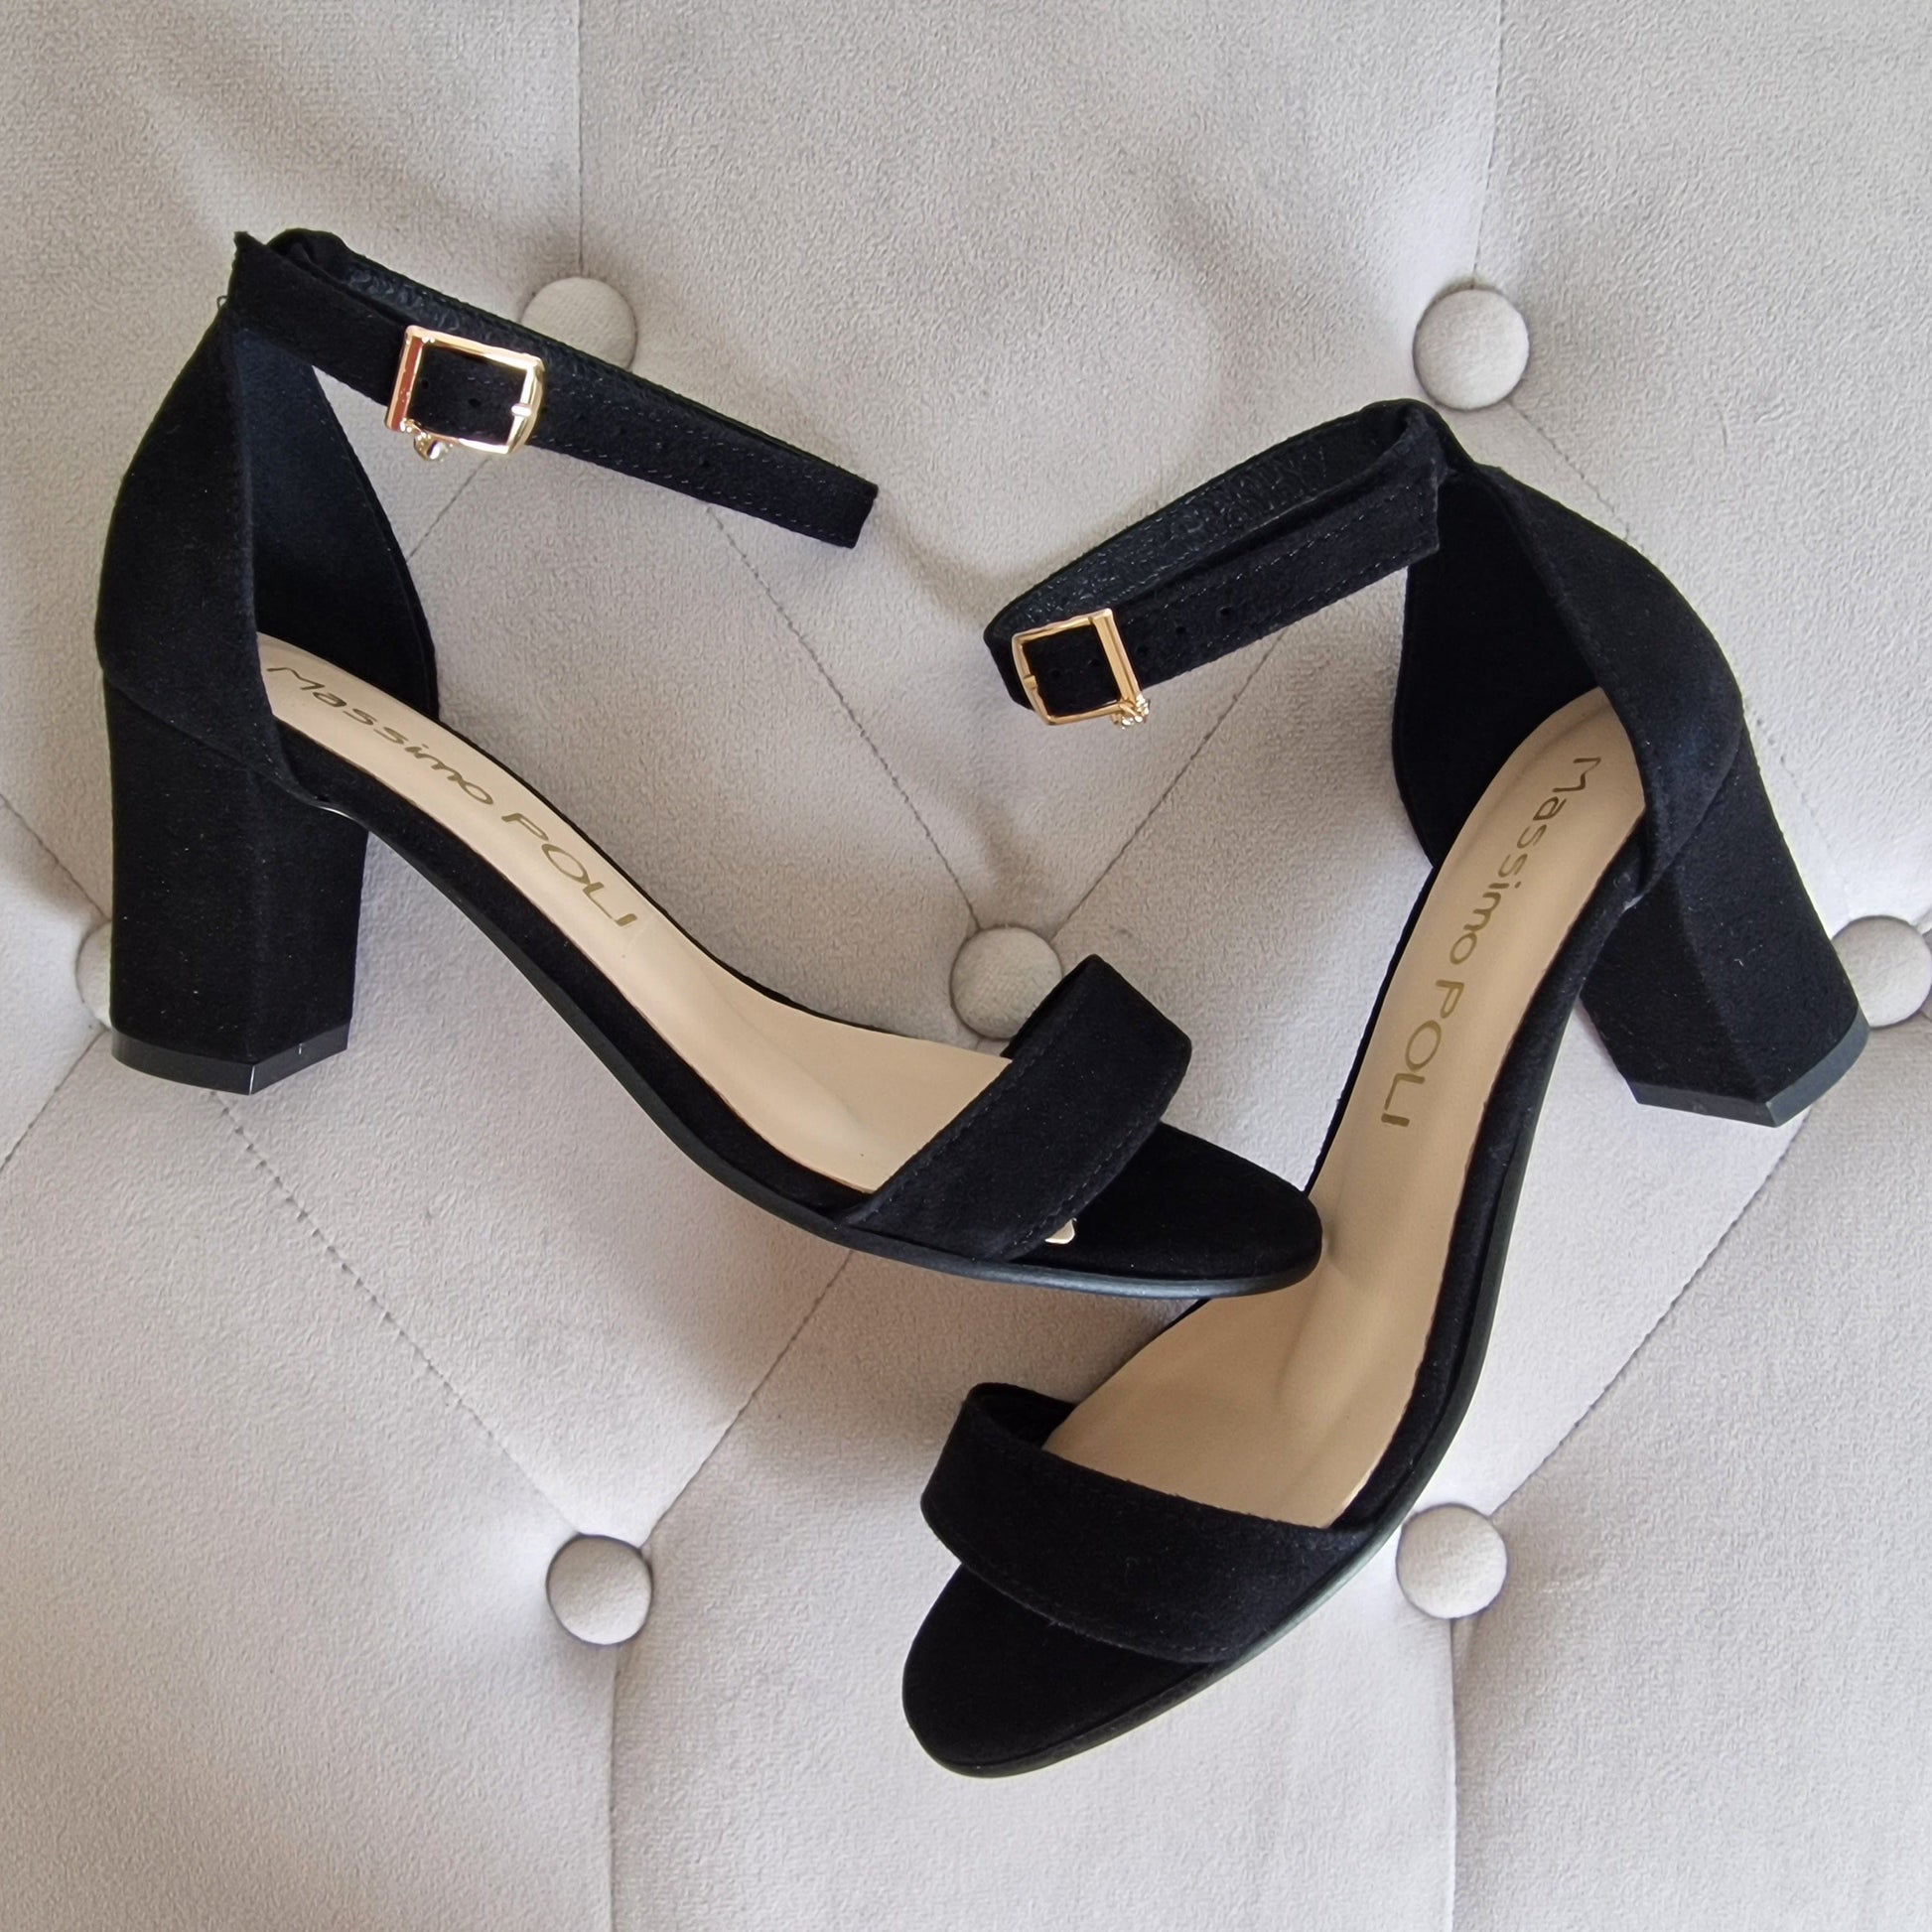 Small size ladies sandals in black suede